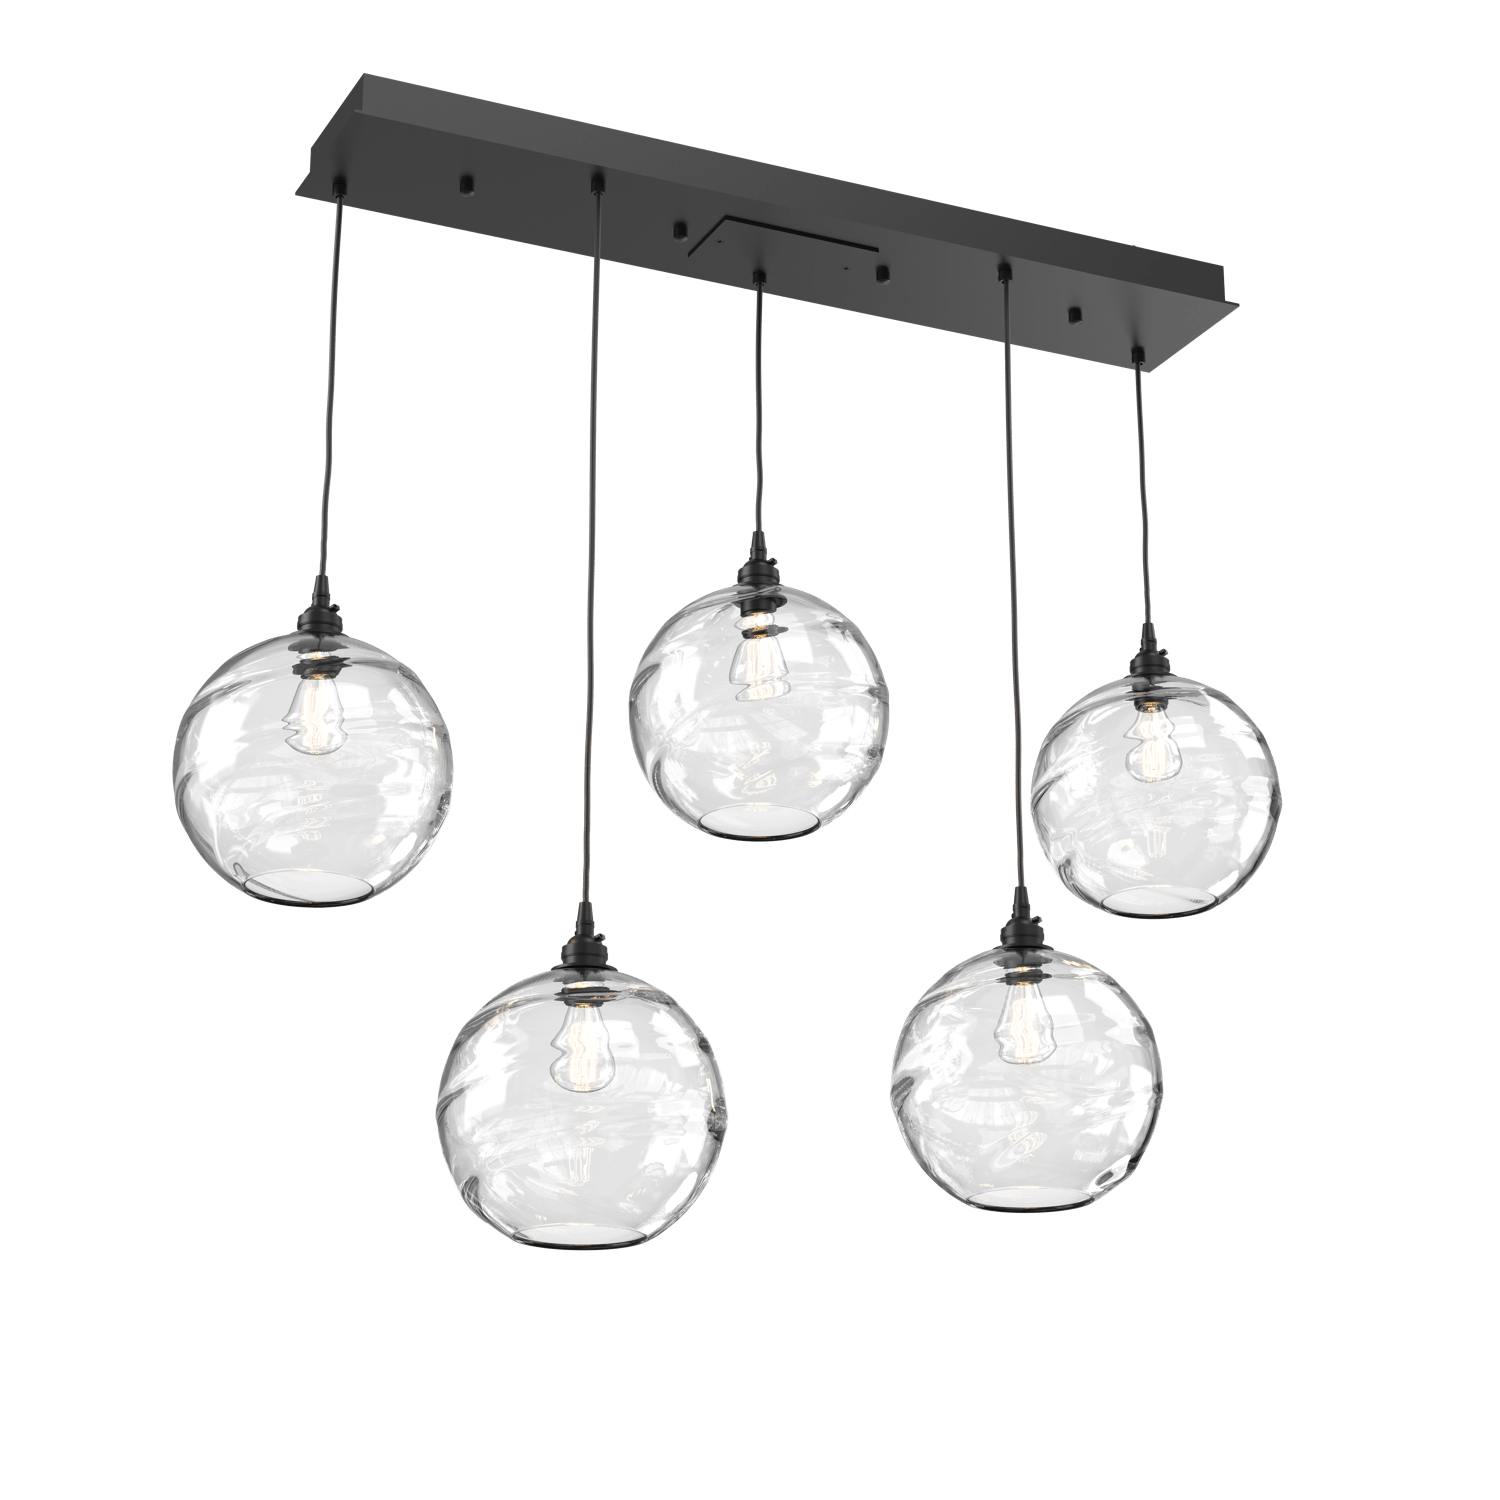 PLB0047-05-MB-OC-Hammerton-Studio-Optic-Blown-Glass-Terra-5-light-linear-pendant-chandelier-with-matte-black-finish-and-optic-clear-blown-glass-shades-and-incandescent-lamping